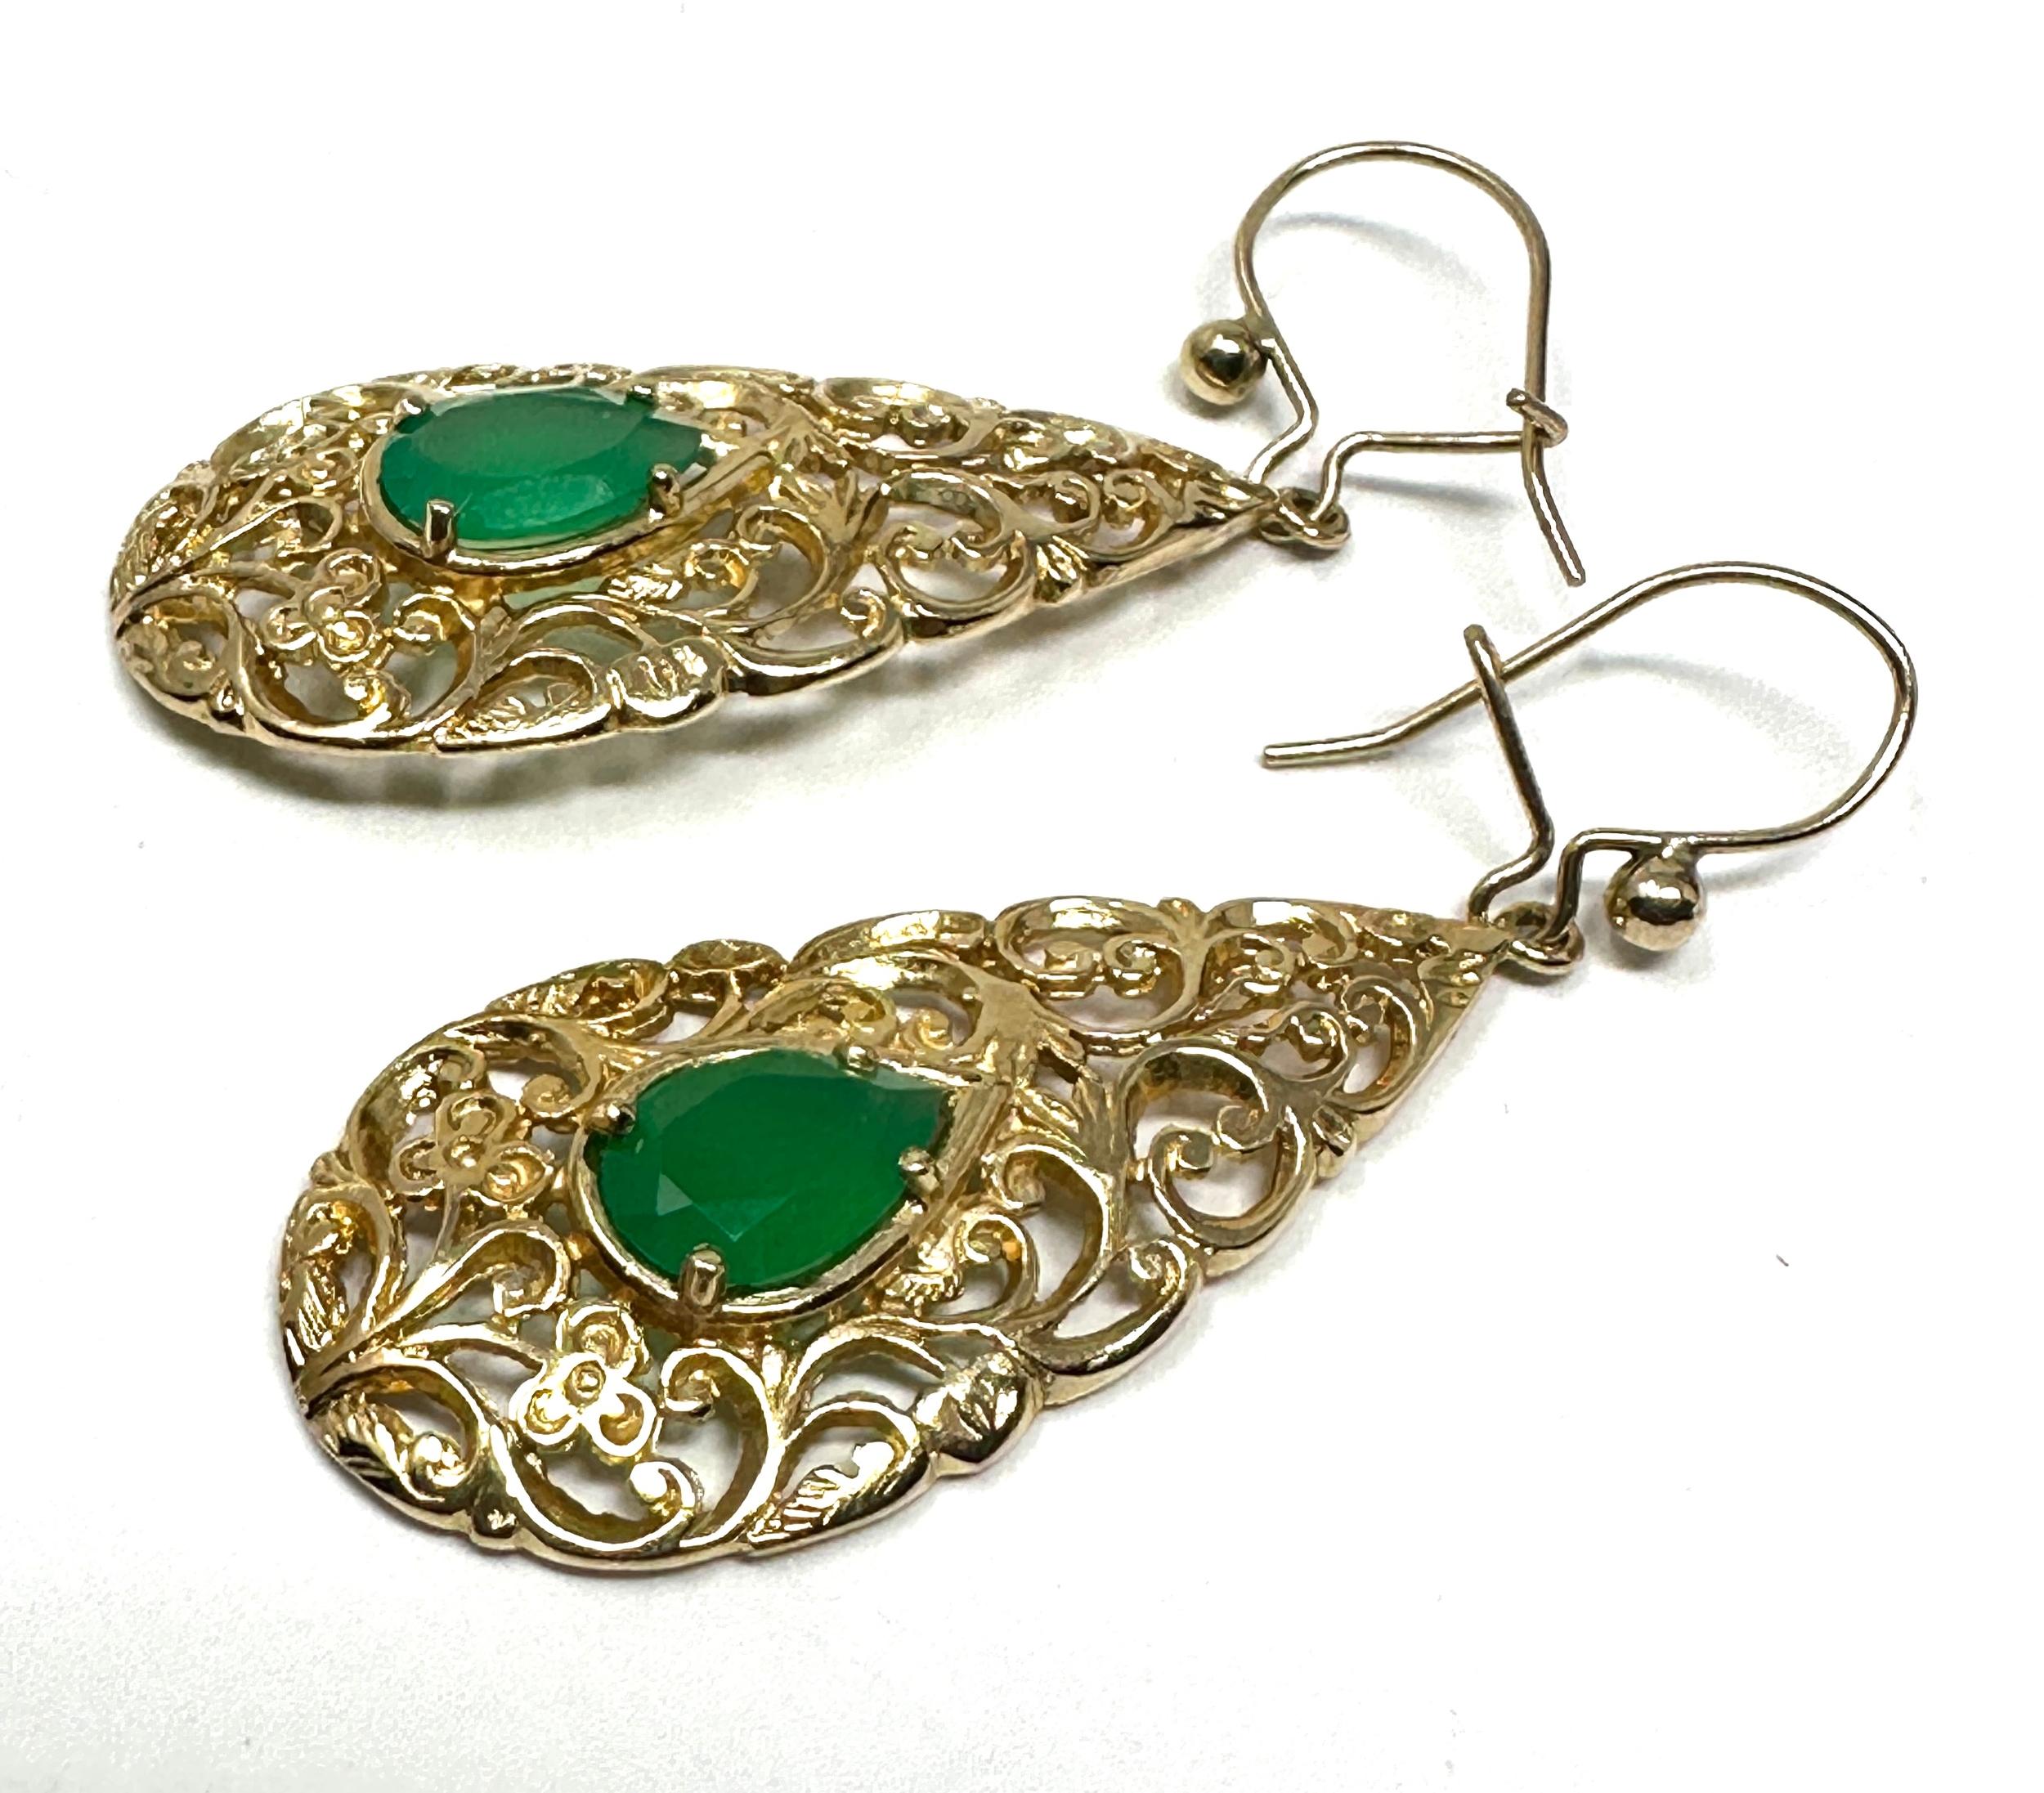 9ct gold chrysoprase earrings weight 5.3 gram measure approx 3.6cm drop not including fixing - Image 2 of 3